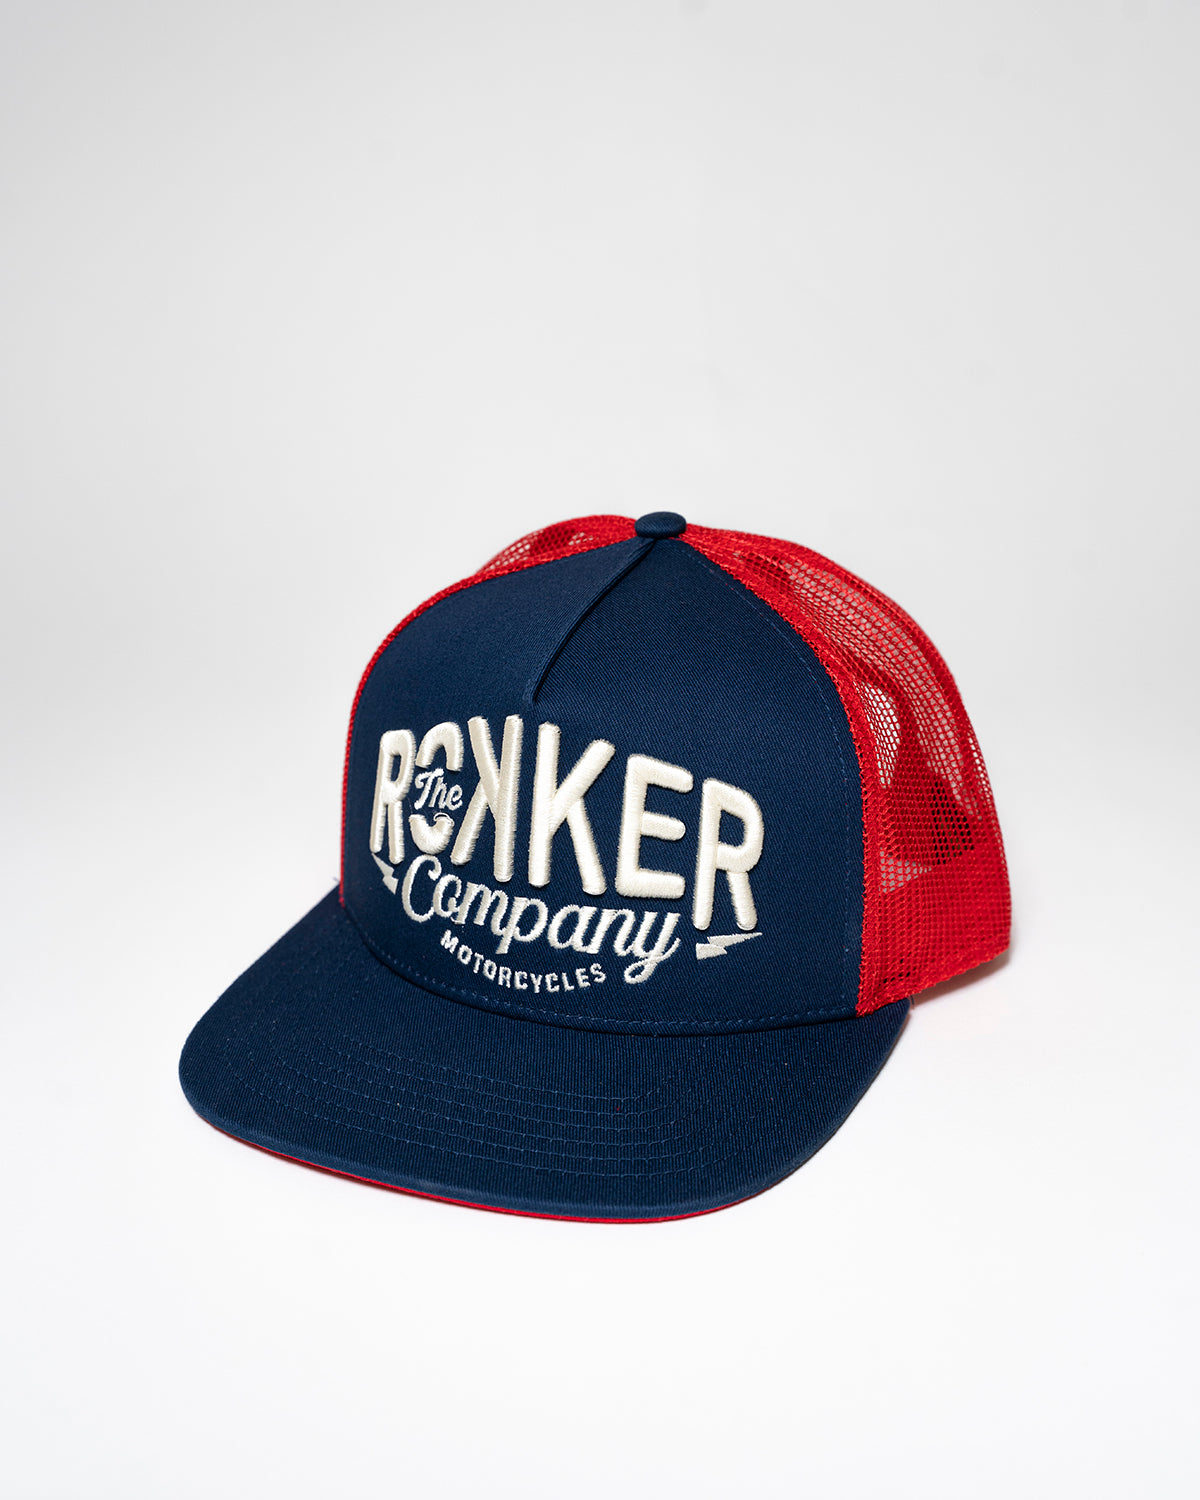 Motorcycles & Co. Snapback Blue/Red